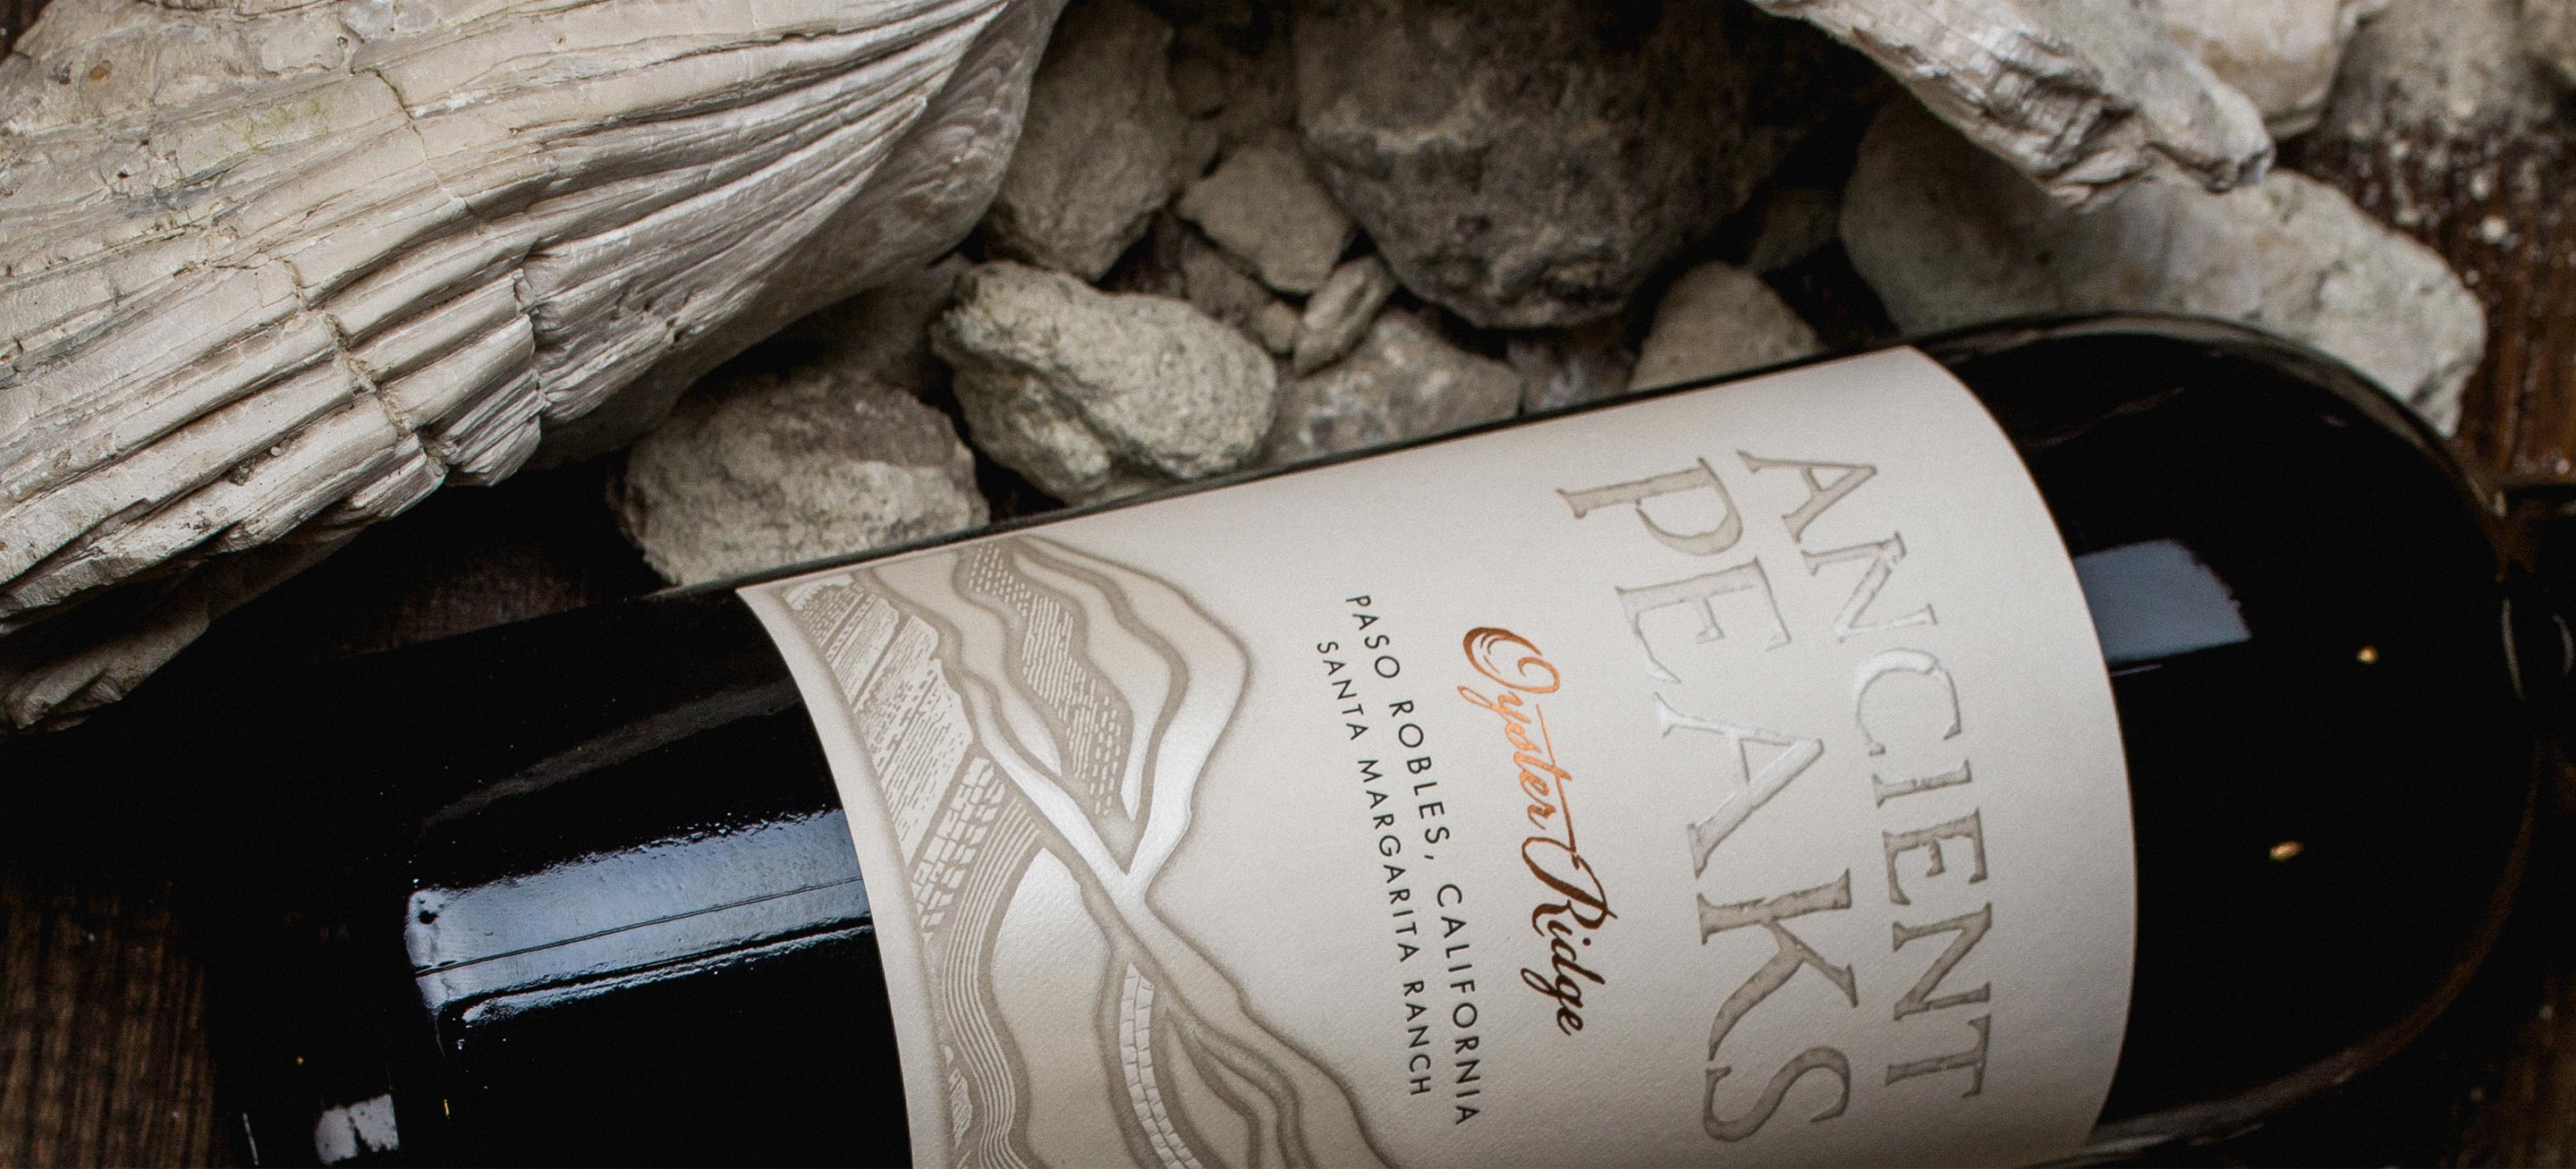 red wine blend, Oyster Ridge, from Paso Robles